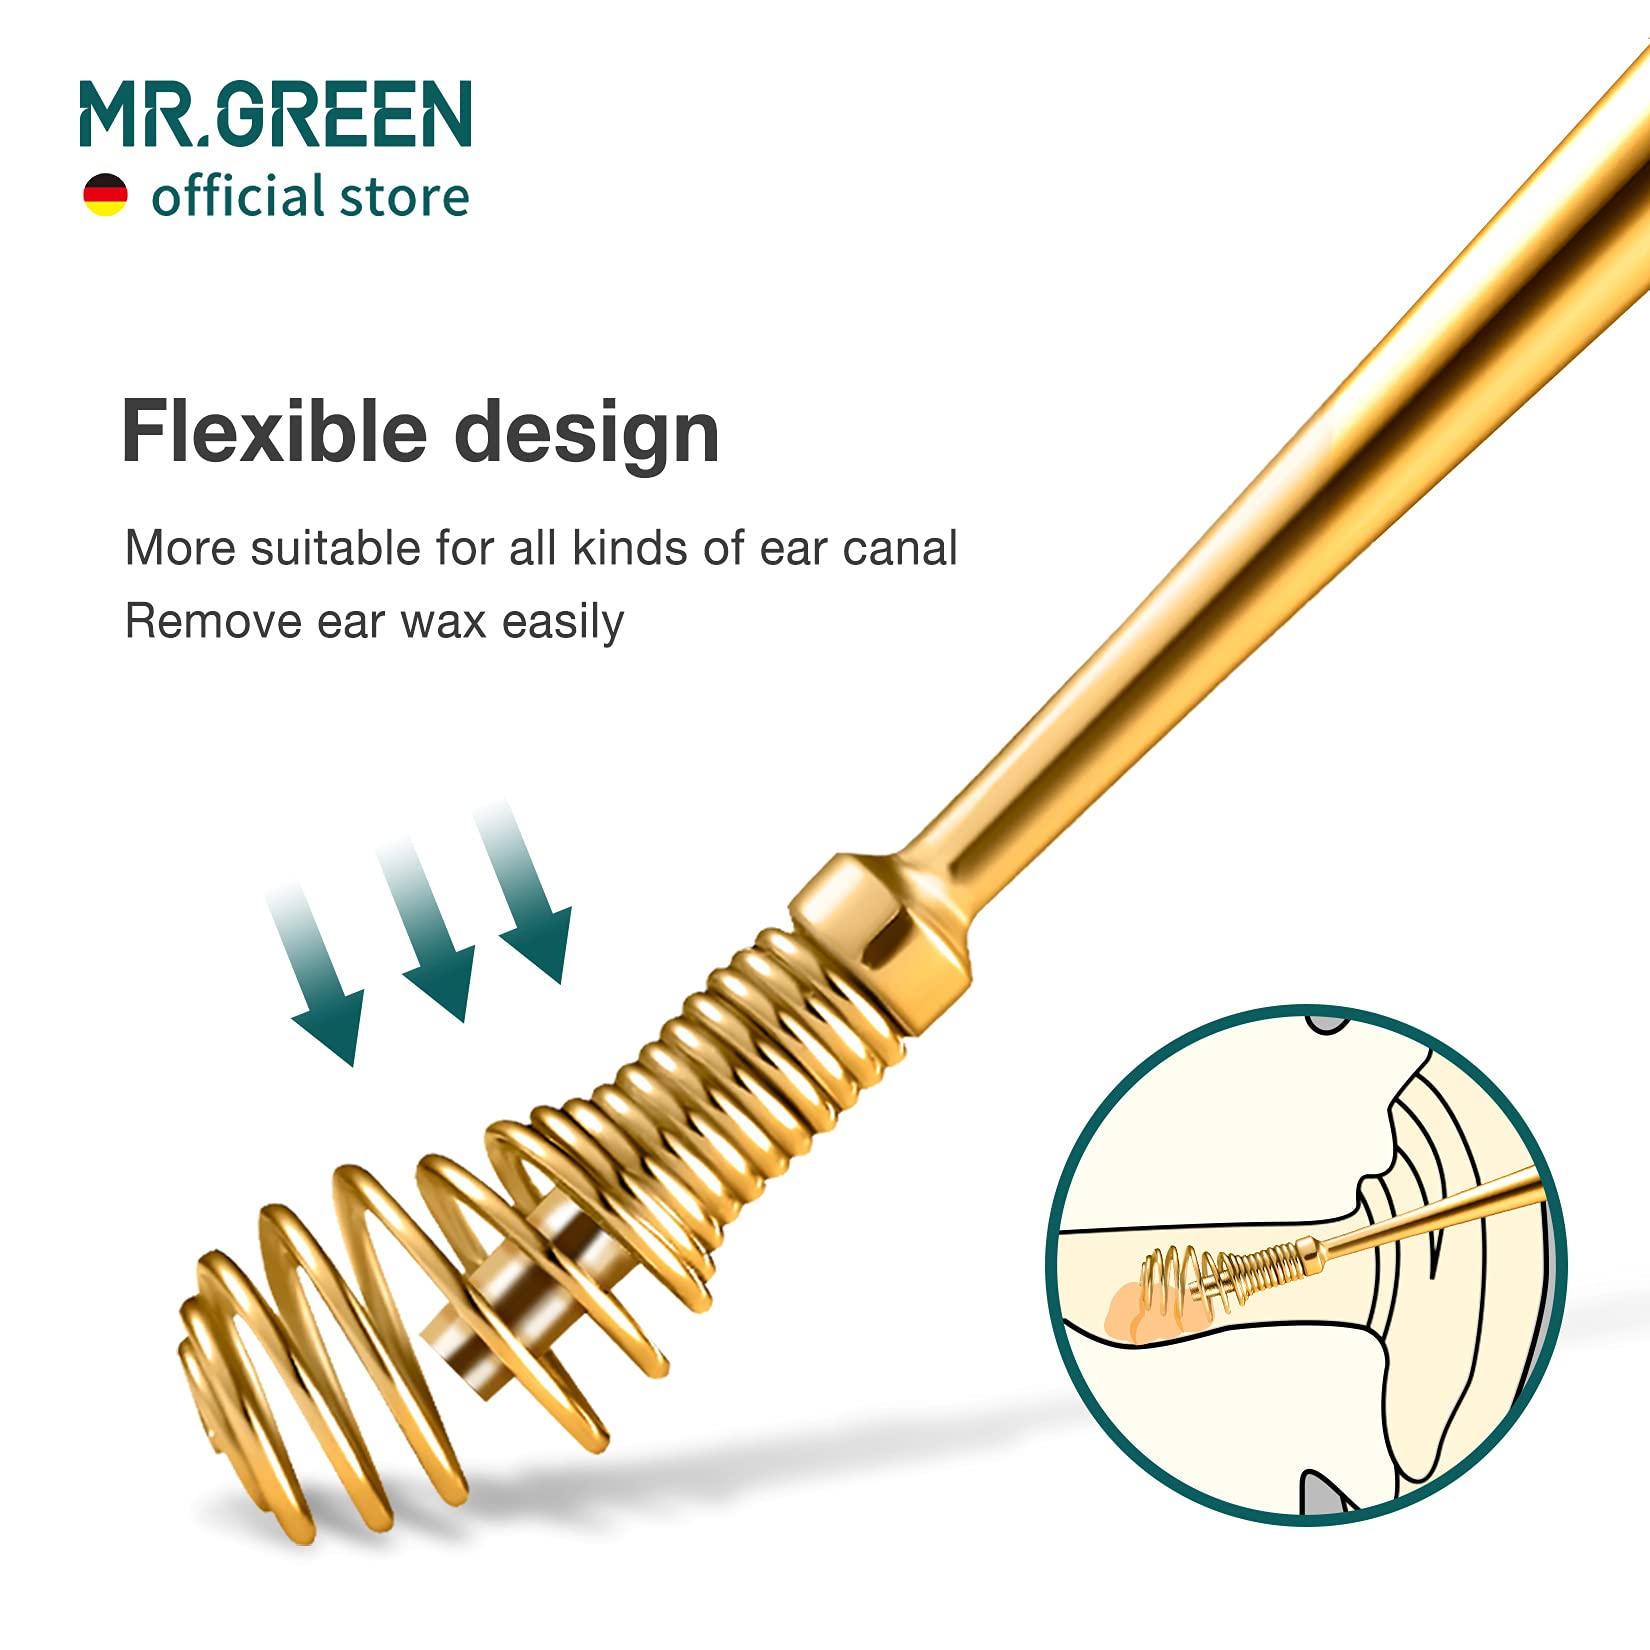 MR.GREEN Ear Wax Removal 360° Spiral Massage Ear Pick Ear Canal Cleaner Stainless Steel Flexible Design Ear Care Tools (Golden)